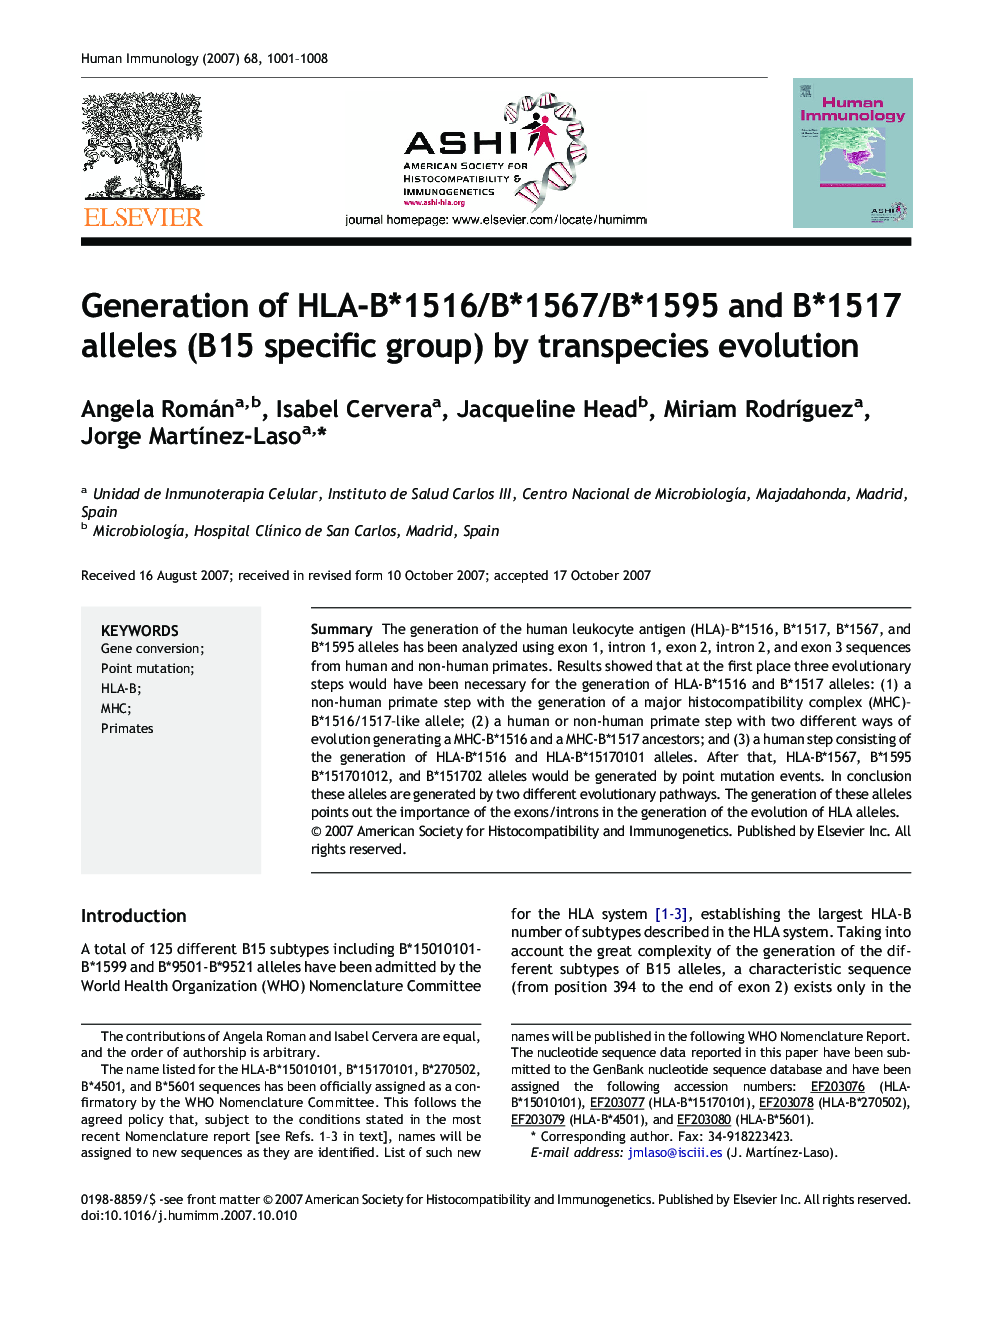 Generation of HLA-B*1516/B*1567/B*1595 and B*1517 alleles (B15 specific group) by transpecies evolution